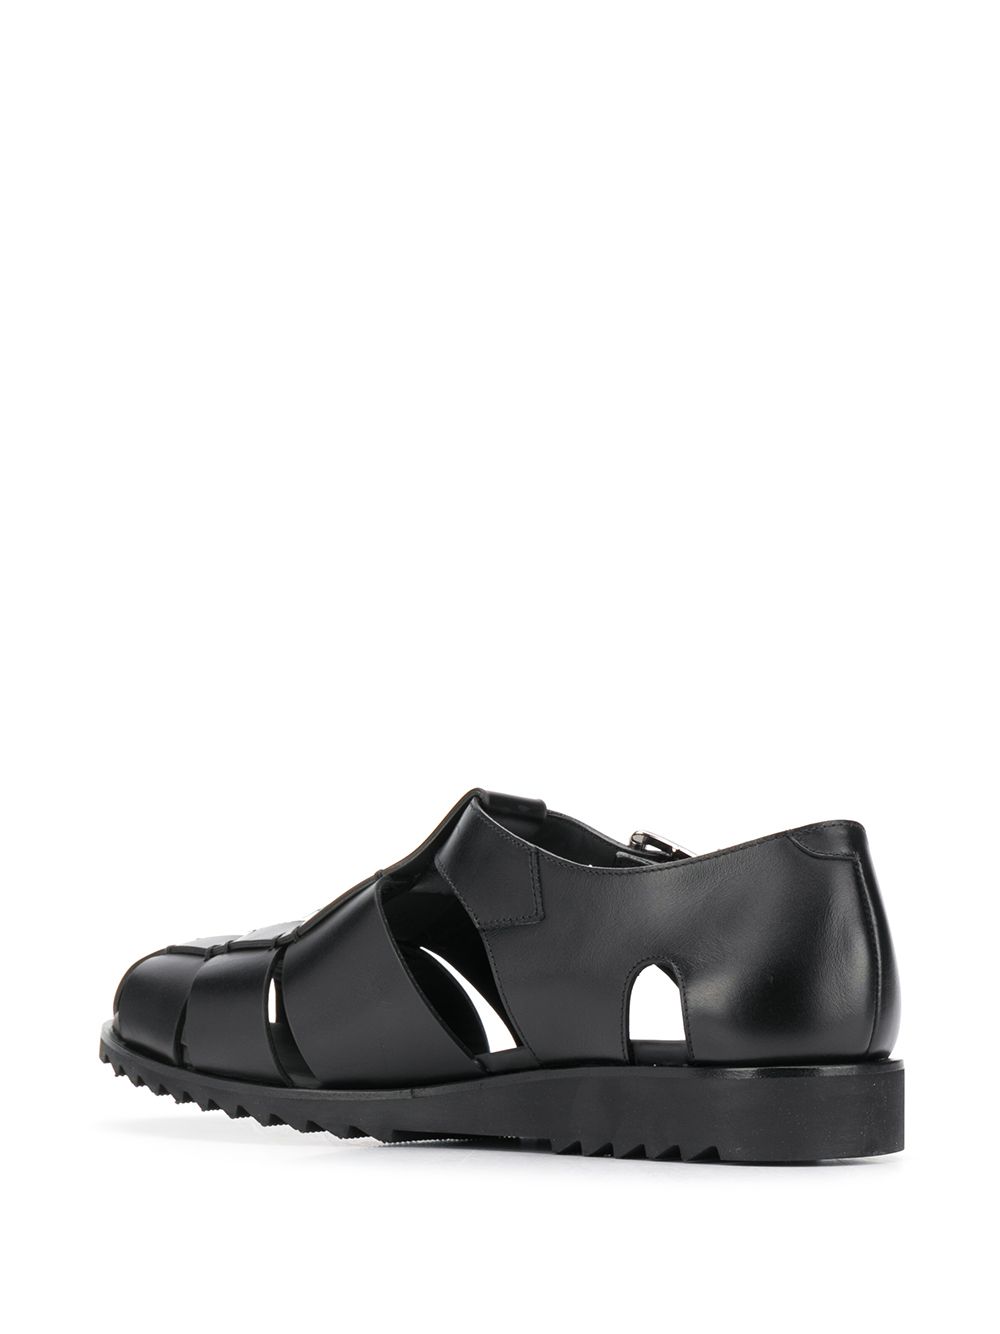 Paraboot Pacific Buckle Sandals - Farfetch